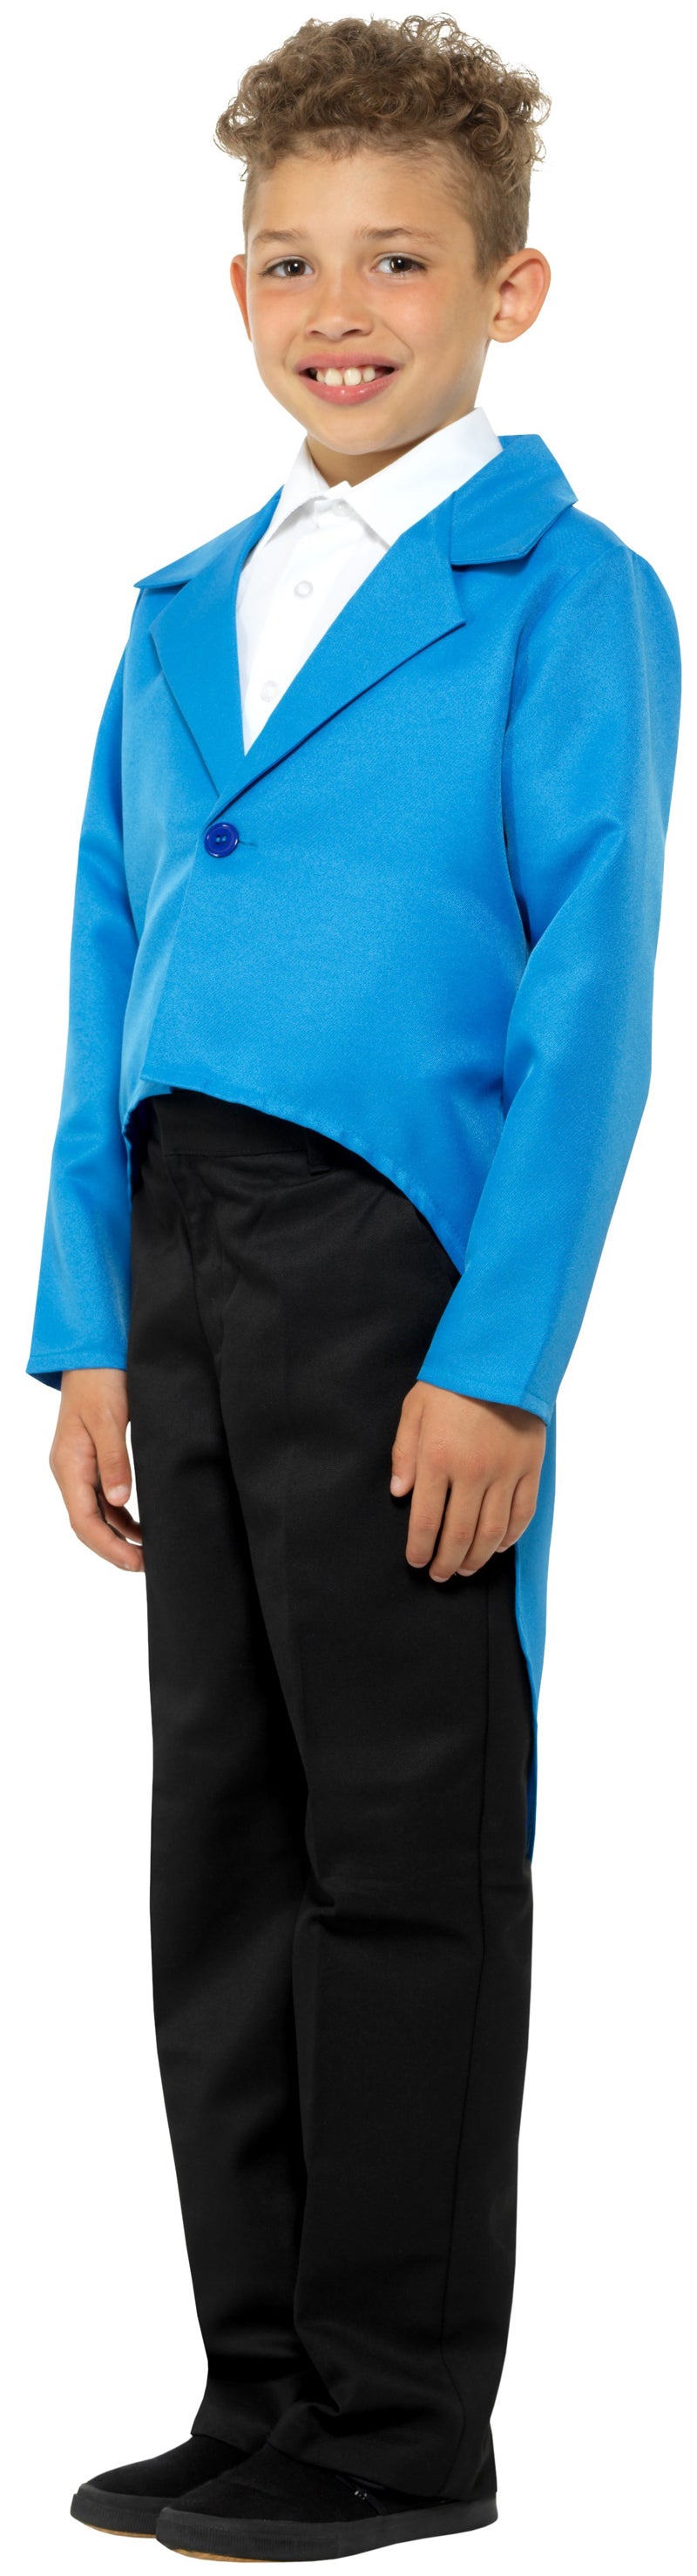 Stylish Blue Tailcoat Accessory for Kids